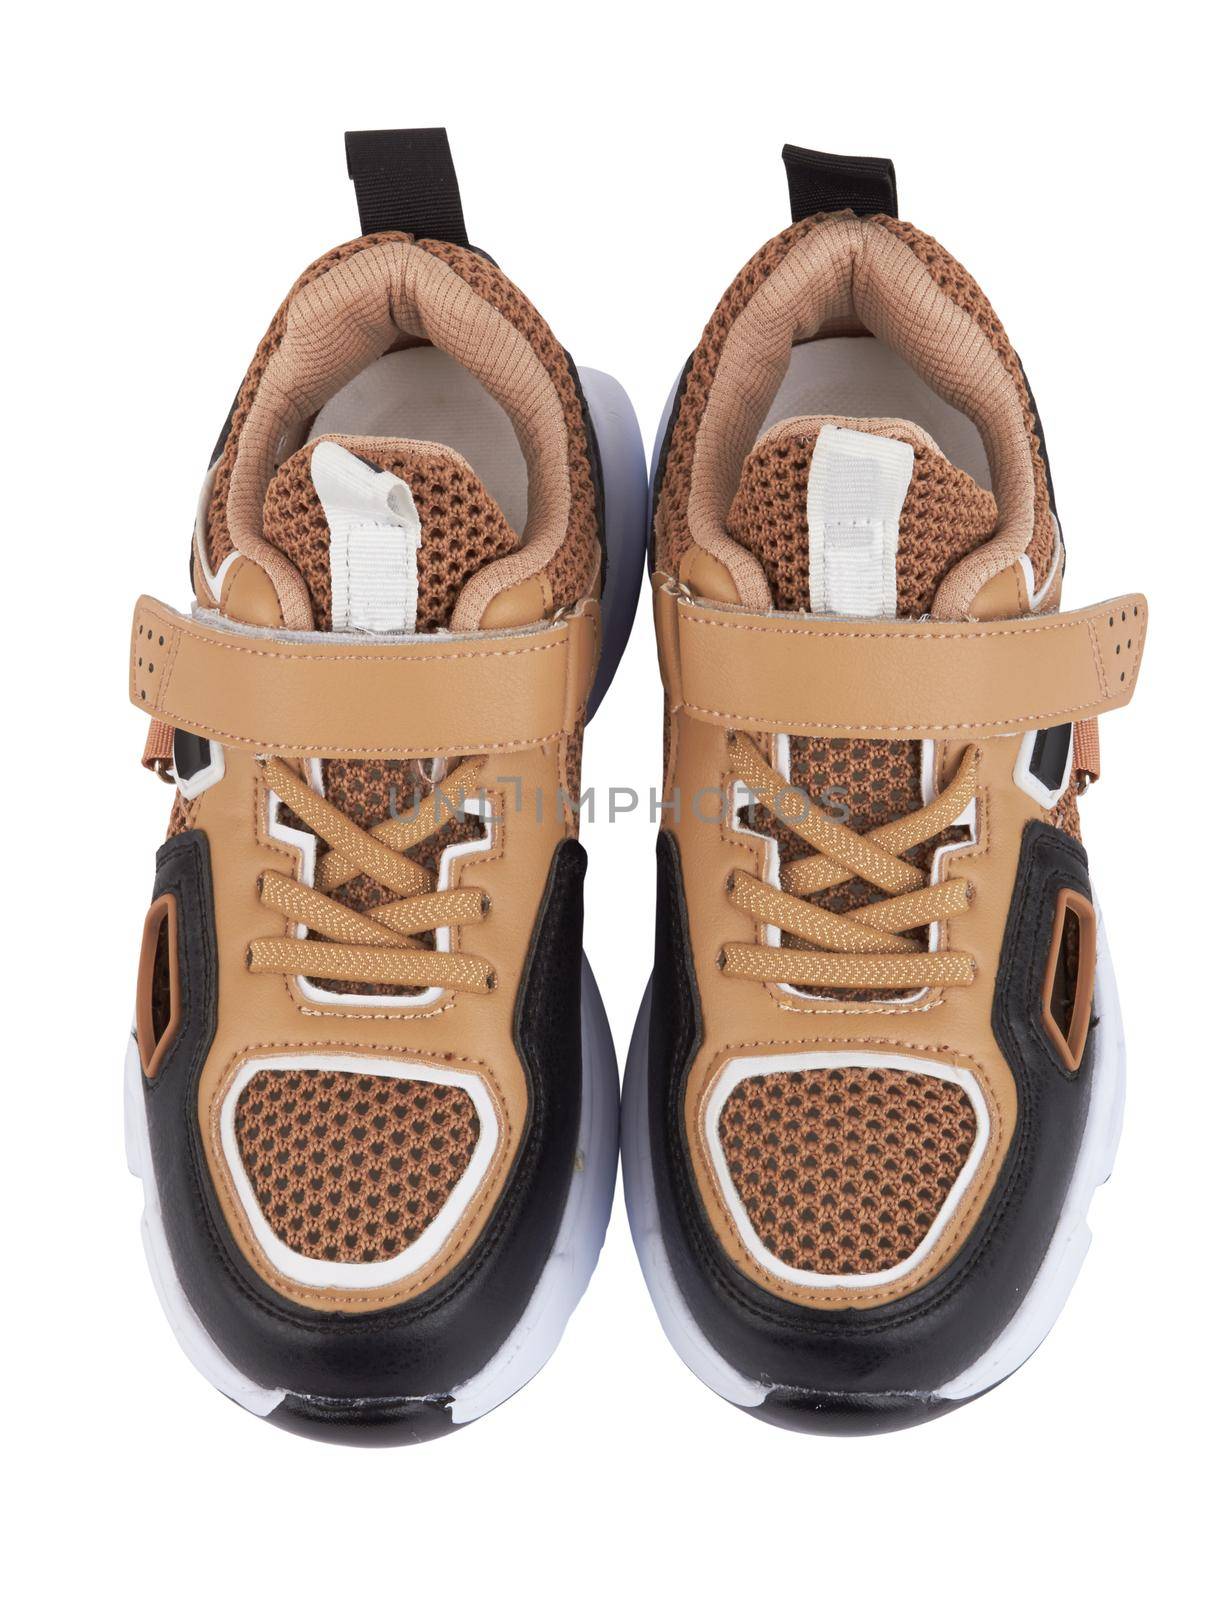 Brown sneakers isolated on a white background